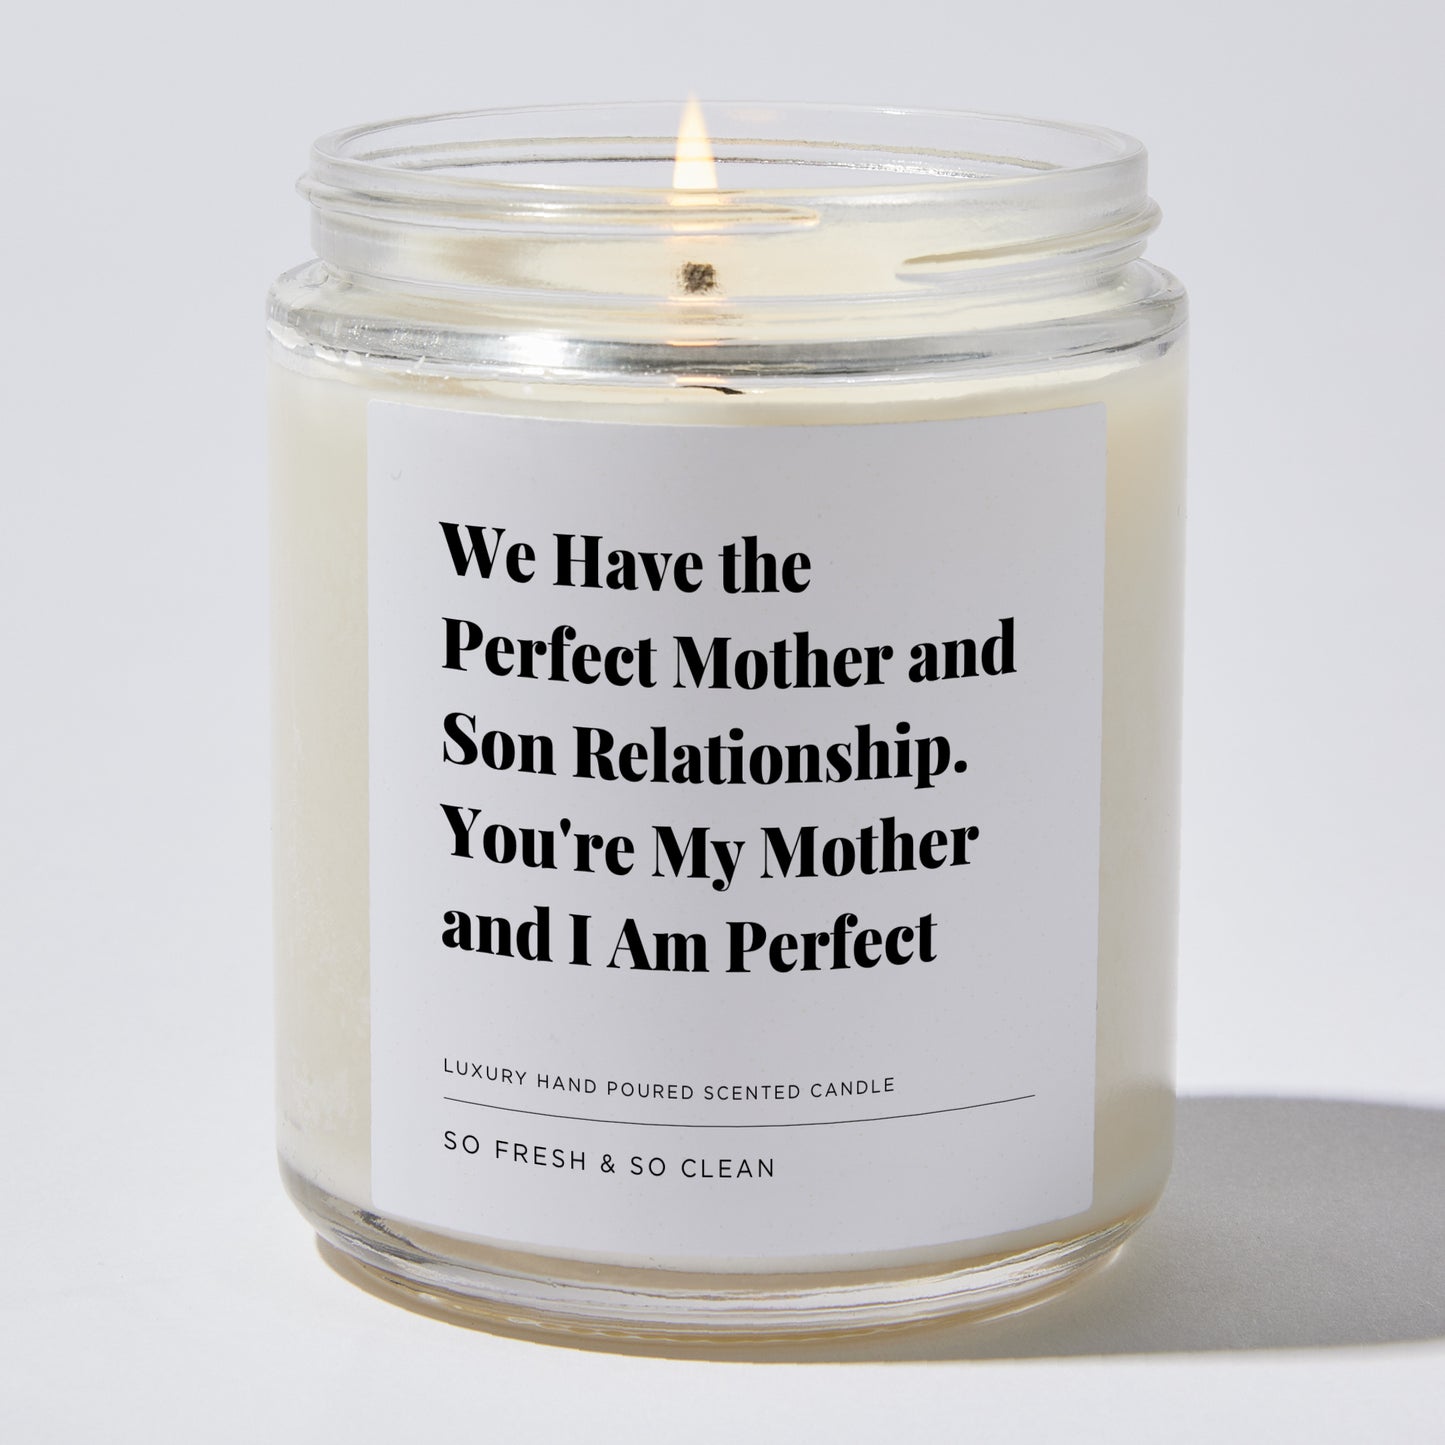 Gift for Mom - We Have the Perfect Mother and Son Relationship. You're my Mother and I am Perfect - Candle